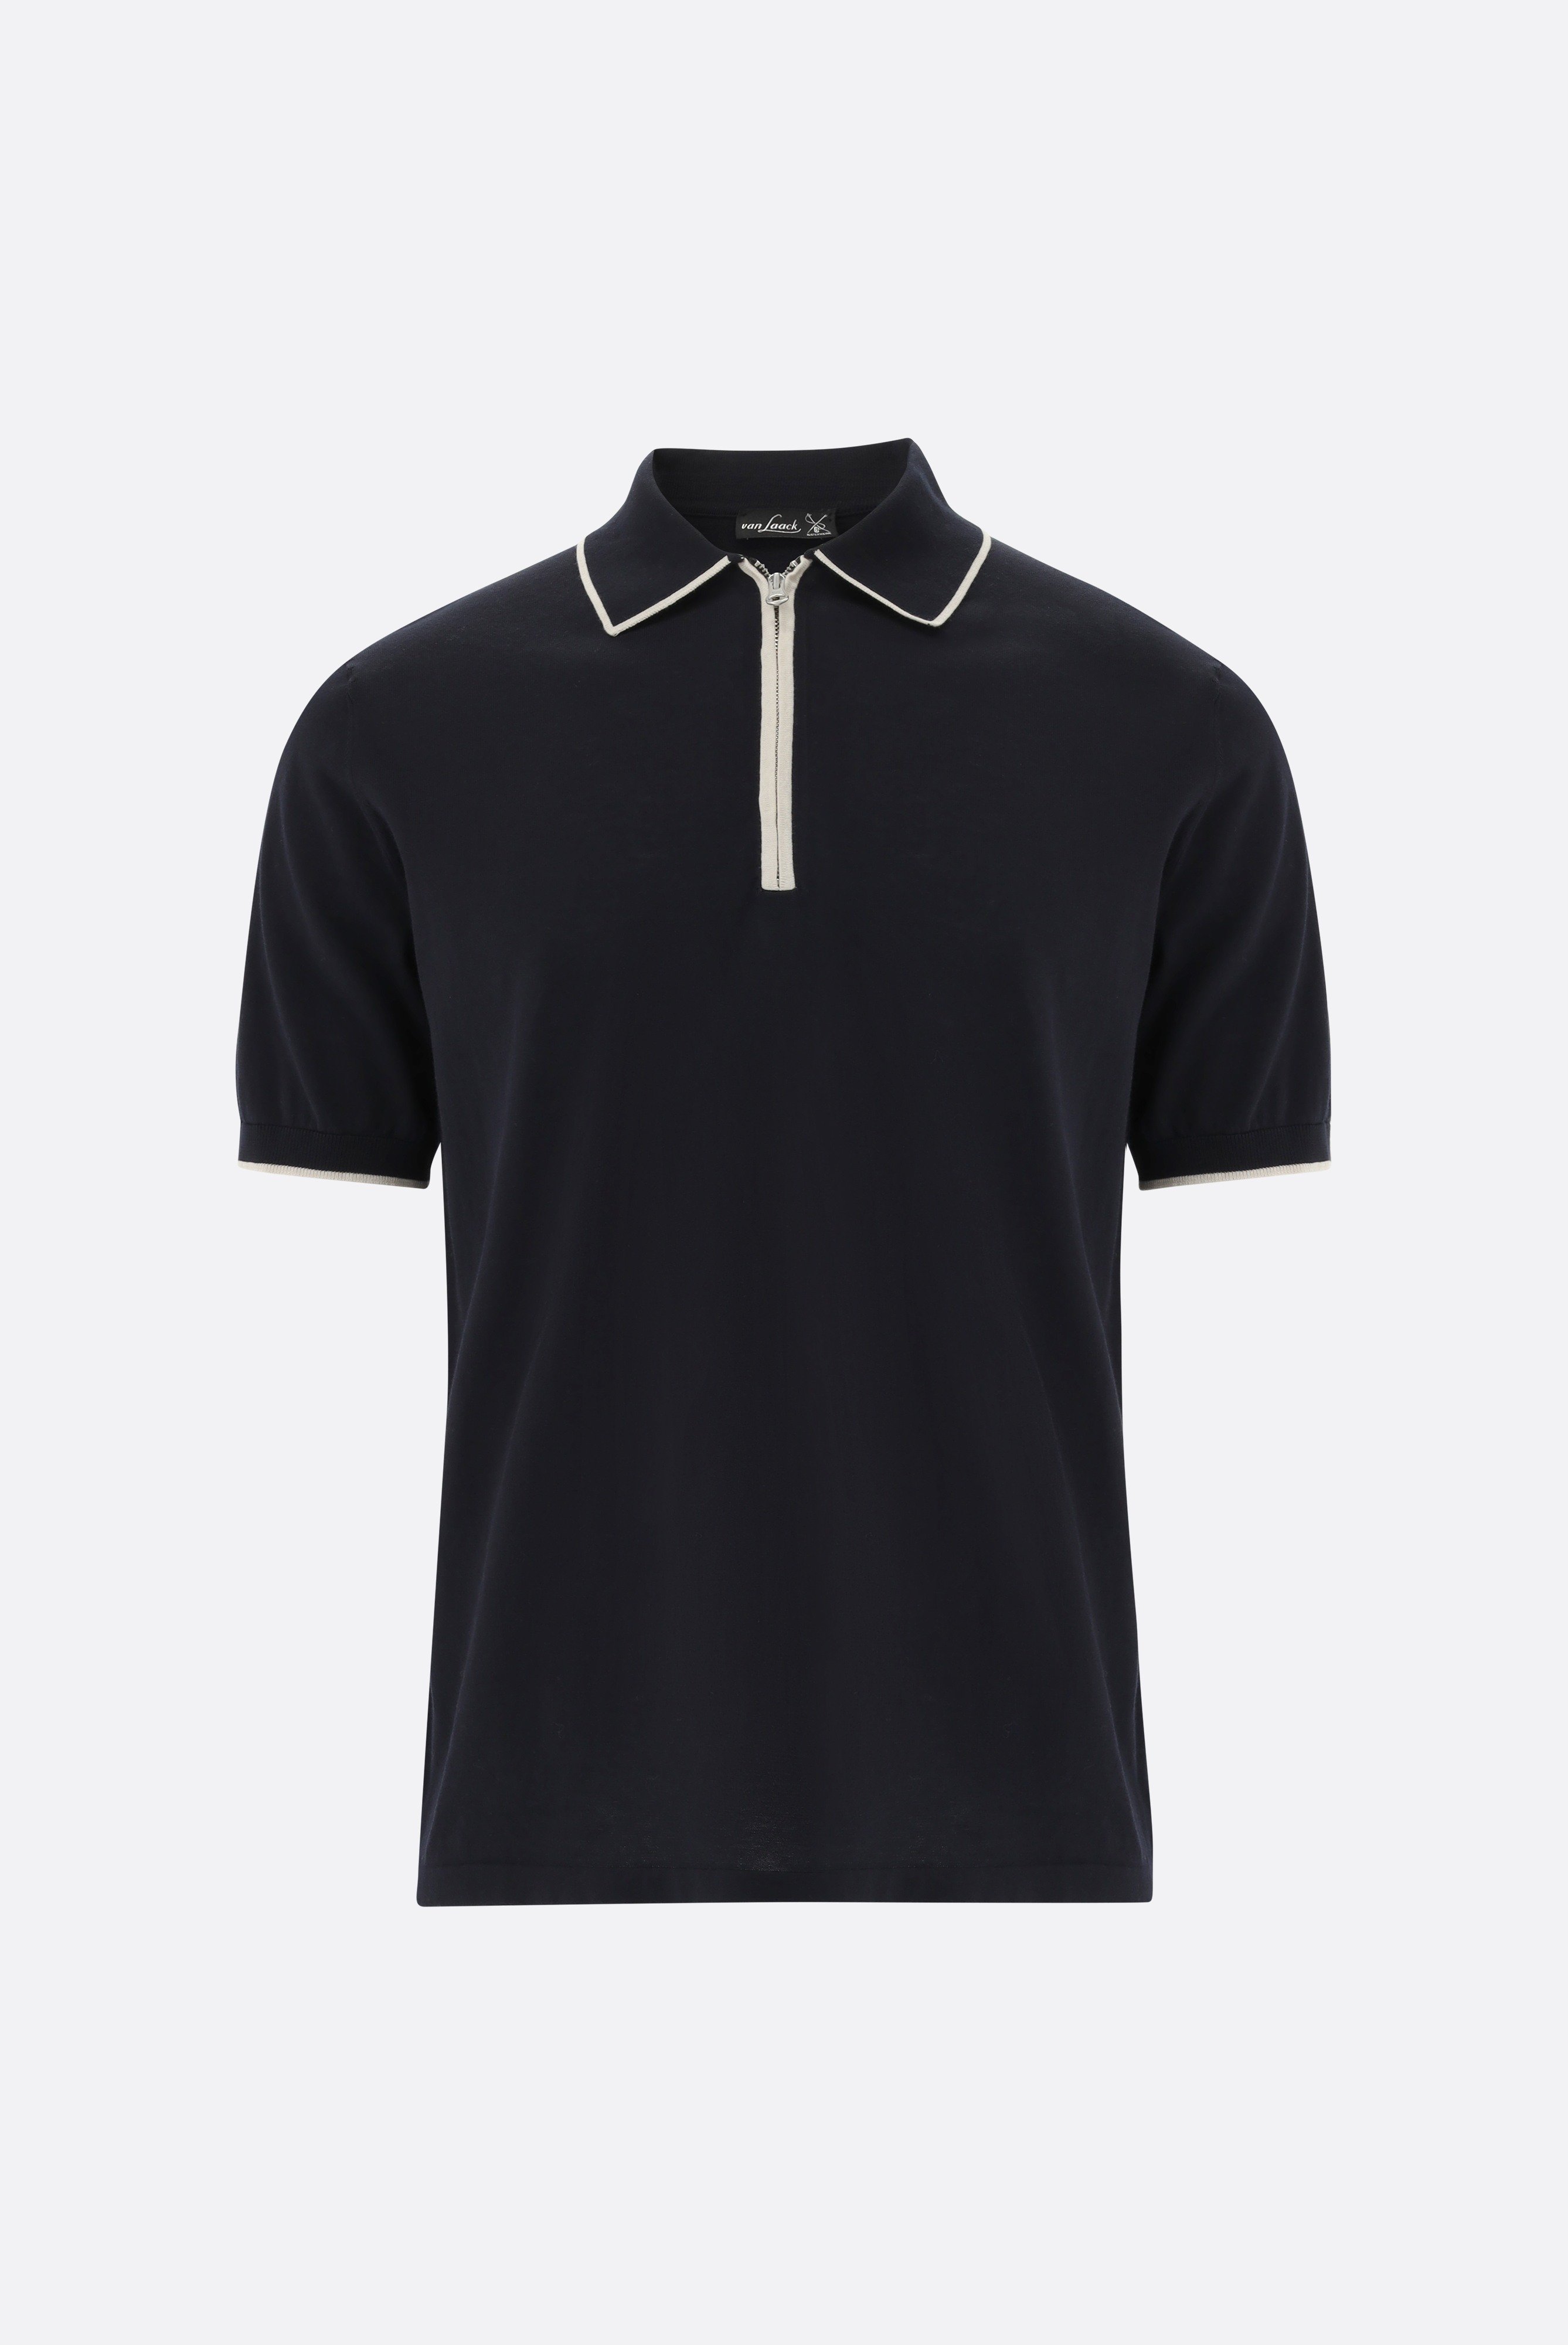 Poloshirts+Zip Knit-Polo in Air Cotton+82.8647.S7.S00174.795.L